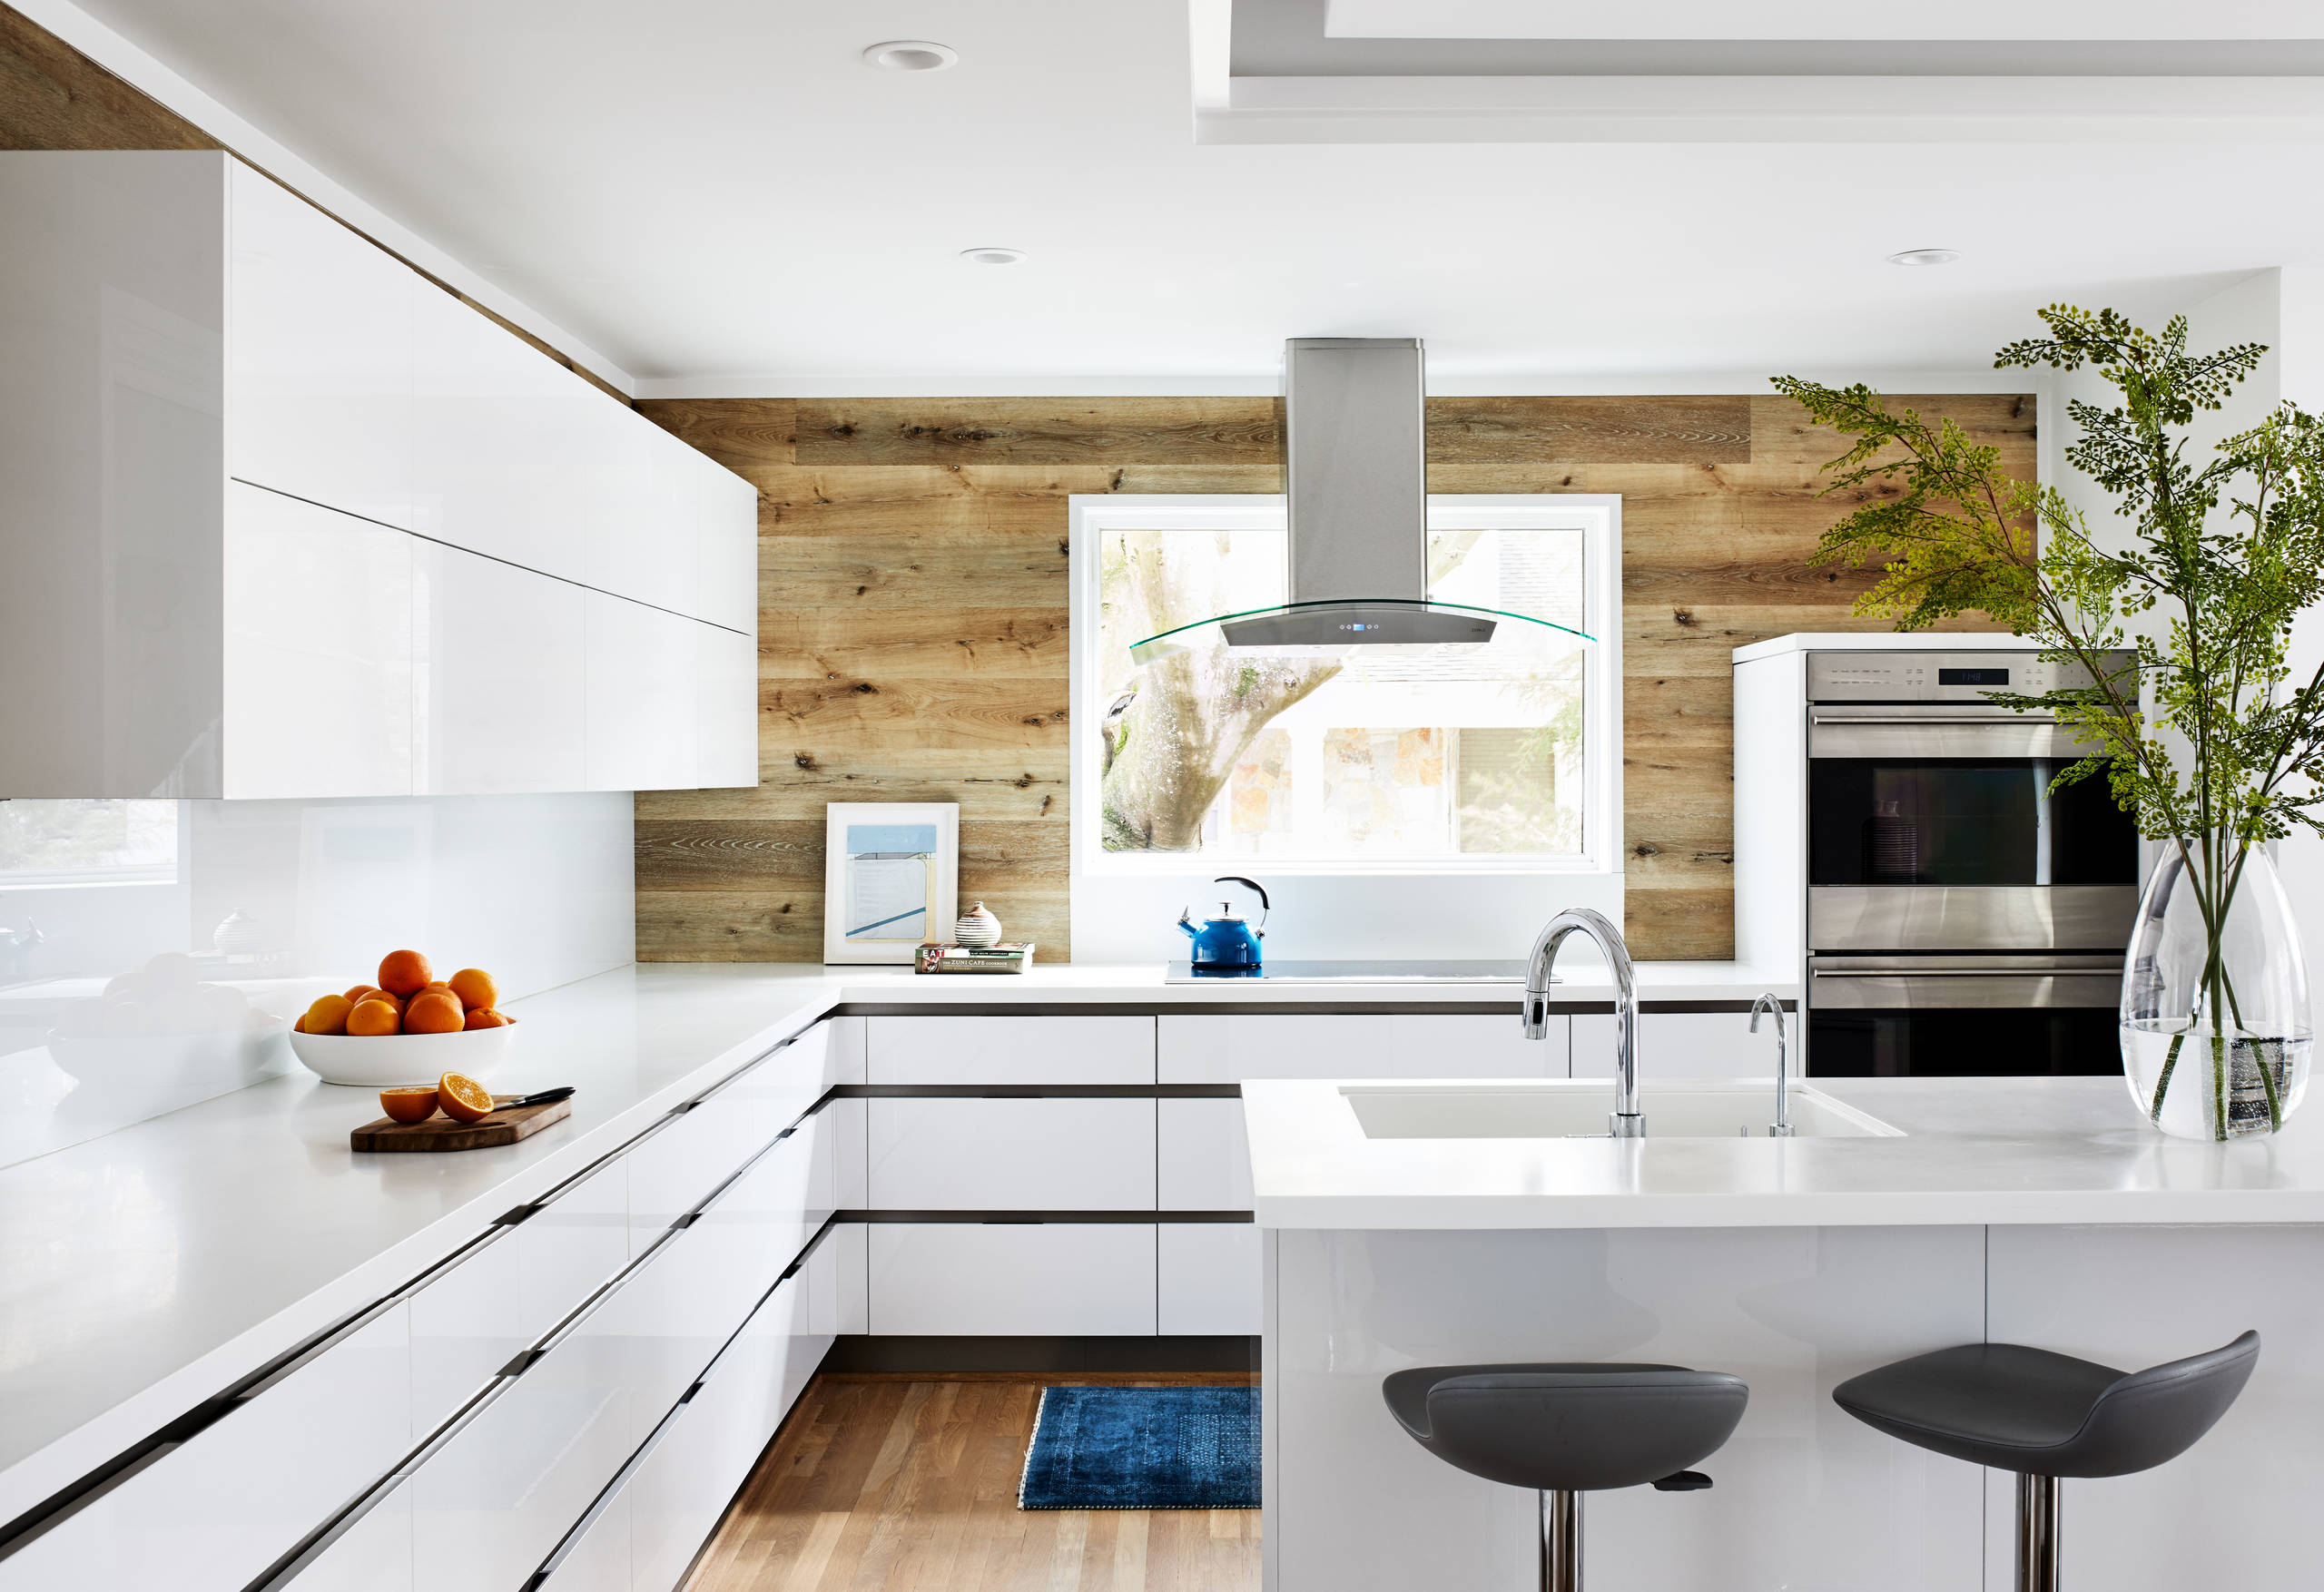 75 Beautiful Mid Century Modern Kitchen With White Cabinets Pictures Ideas January 2022 Houzz